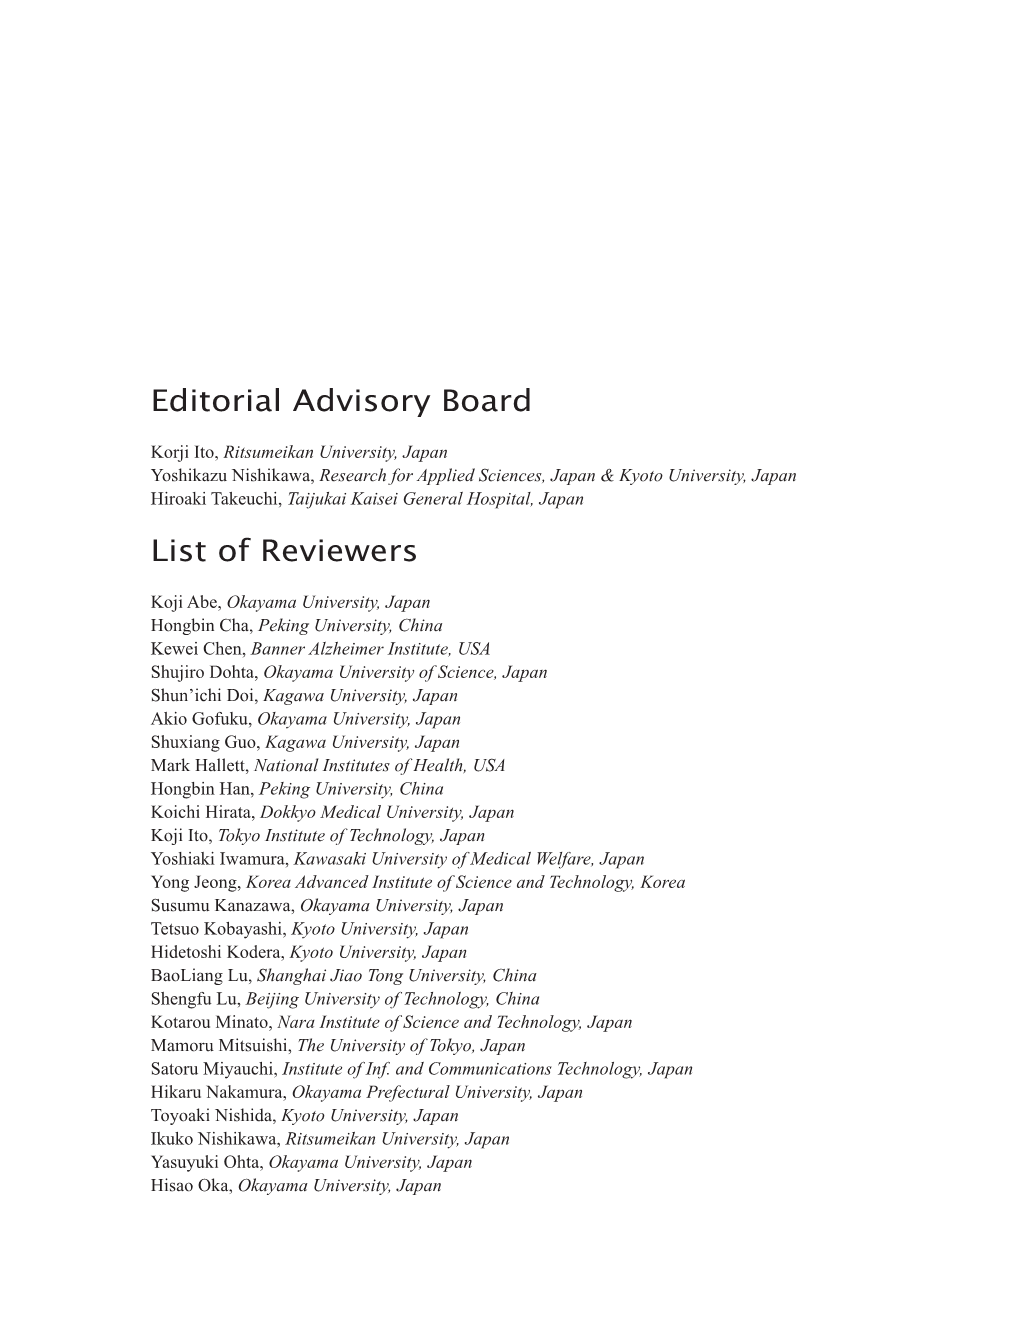 Editorial Advisory Board List of Reviewers